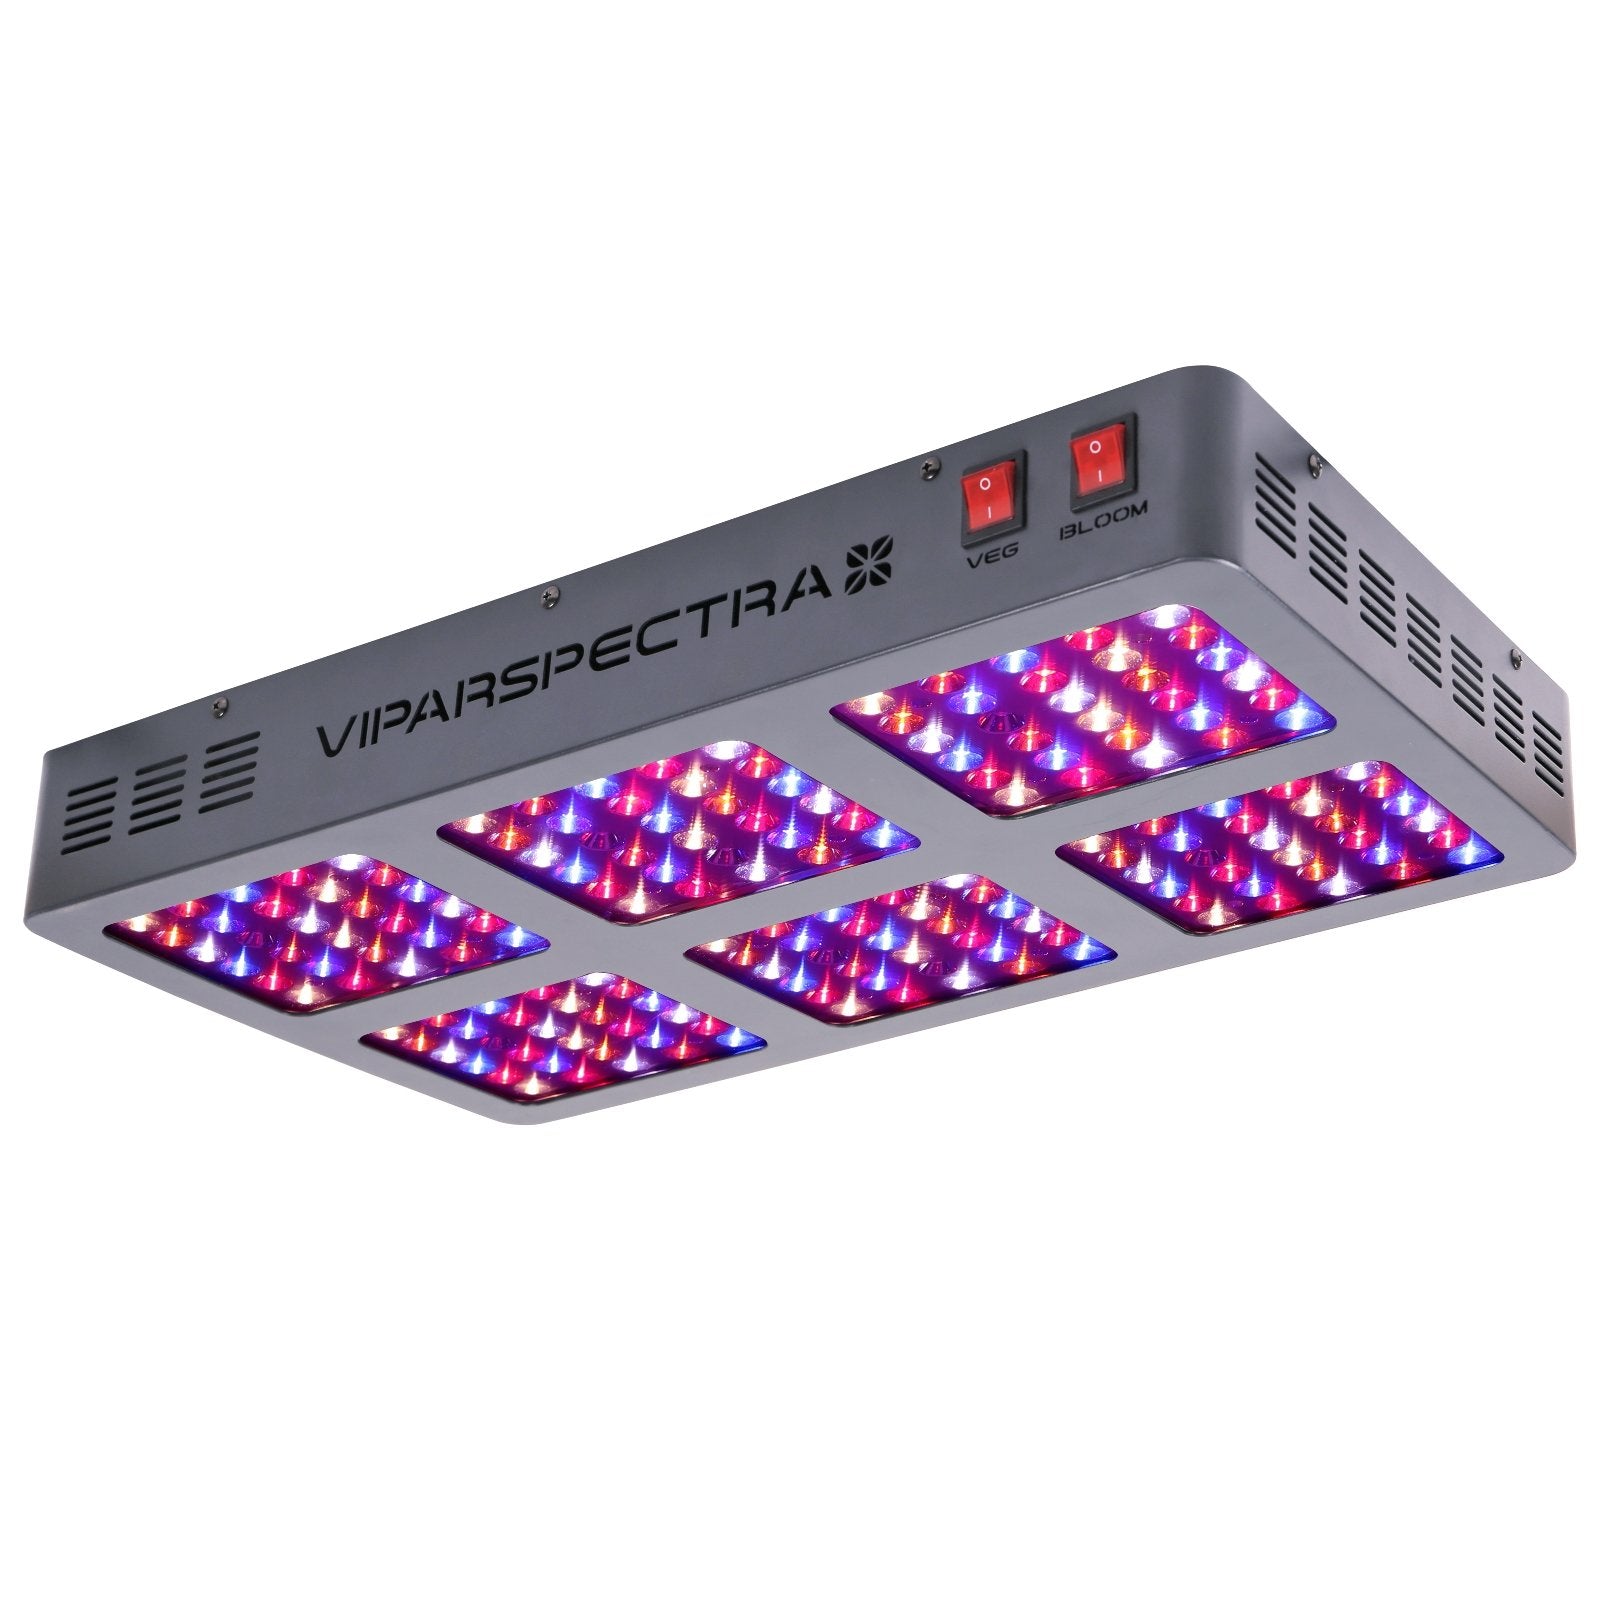 VIPARSPECTRA Reflector-Series 900W (R900) LED Grow Light